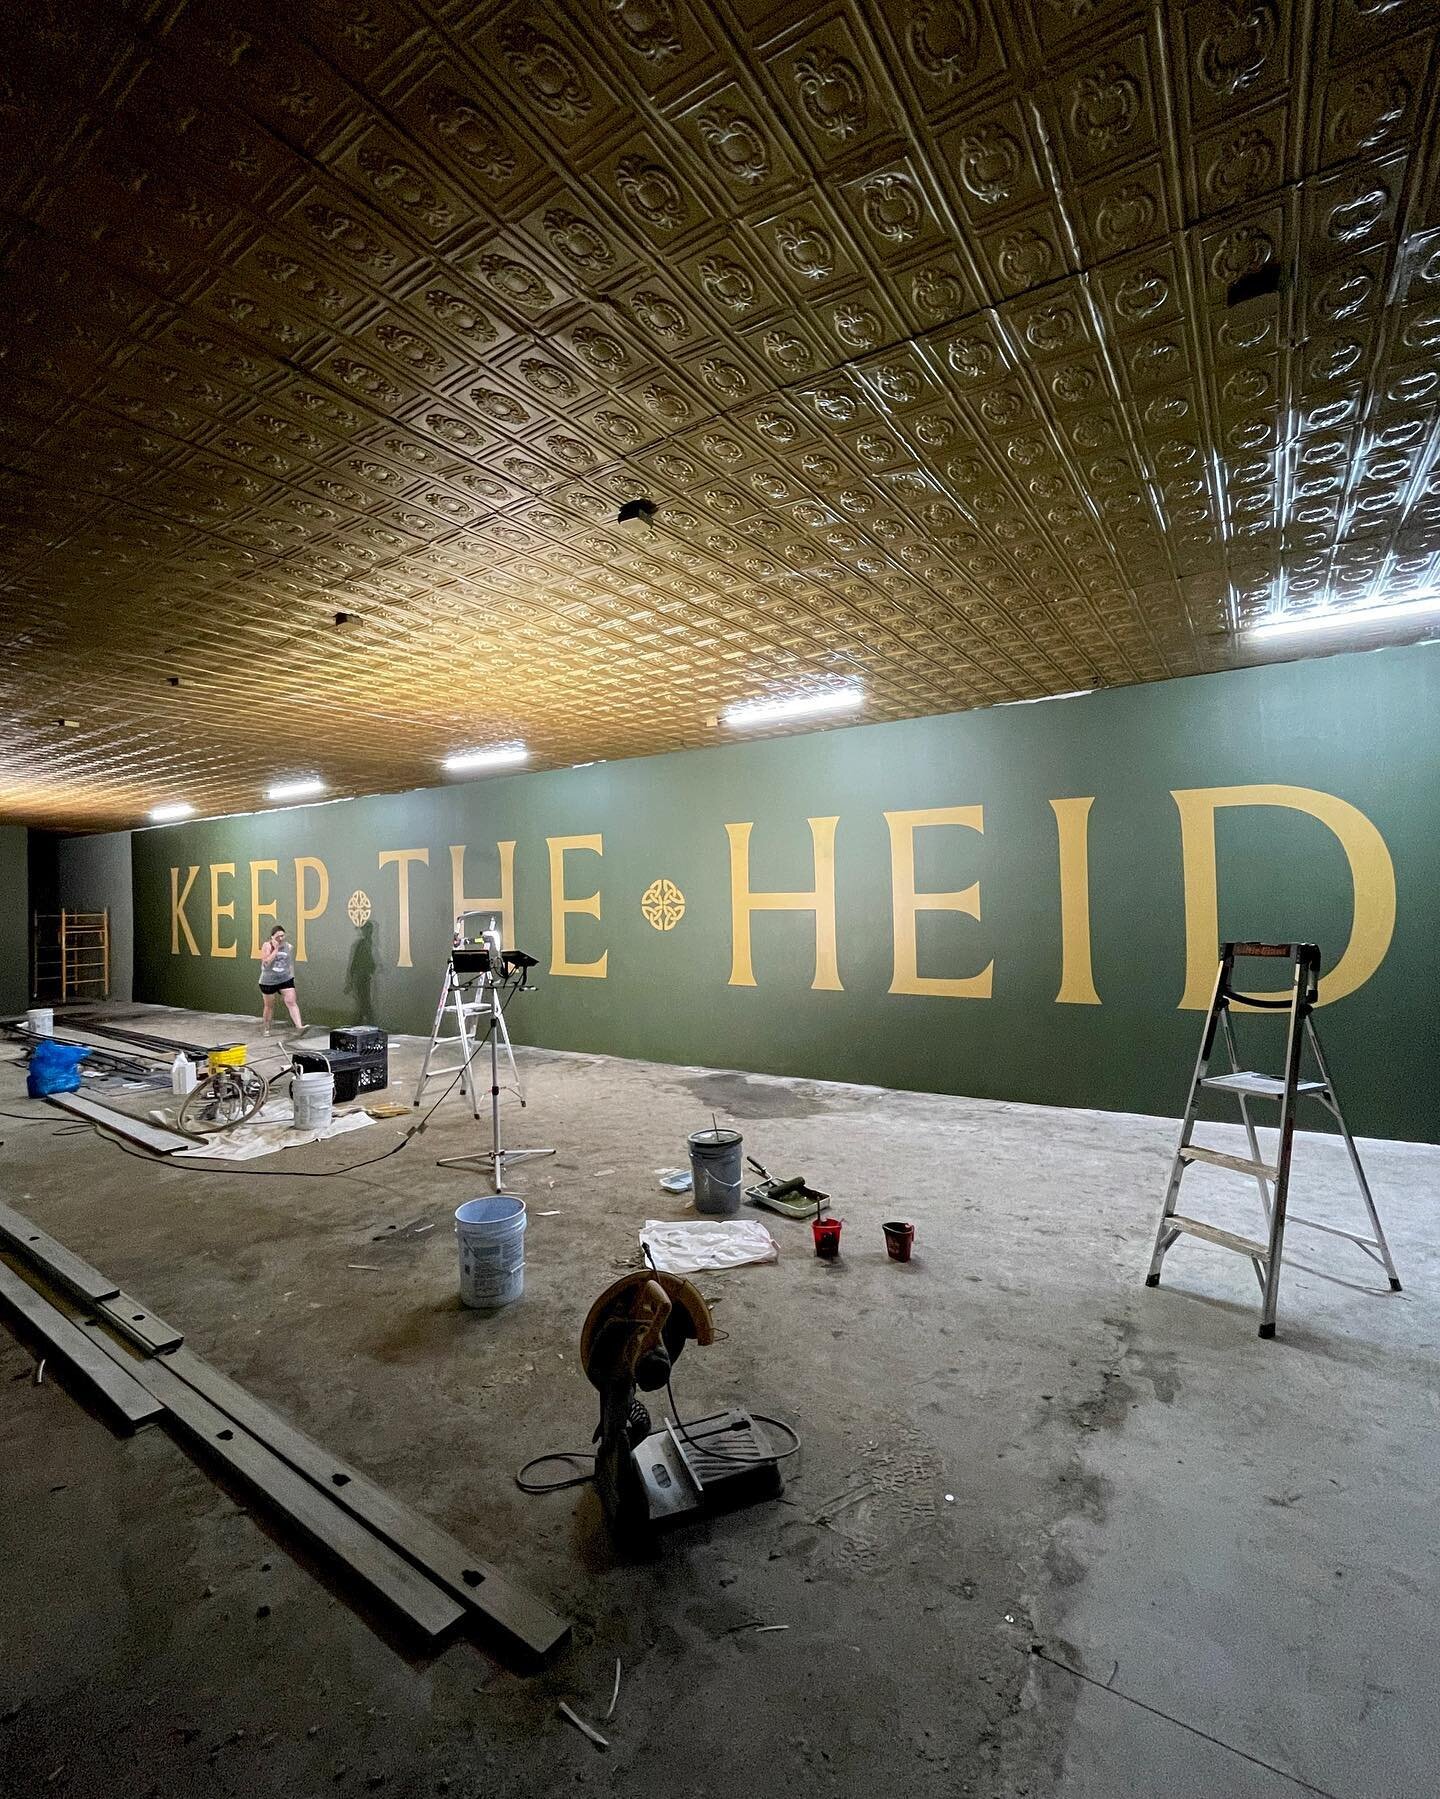 Another #kinandkilt painted sign in the axe throwing room with the old Scottish phrase to &ldquo;keep the heid&rdquo; or head - stay calm. 

The phrase is massive with letters over 5 ft tall, spanning 55ft wide

#axethrowing  #hatchethrowing #watl #a